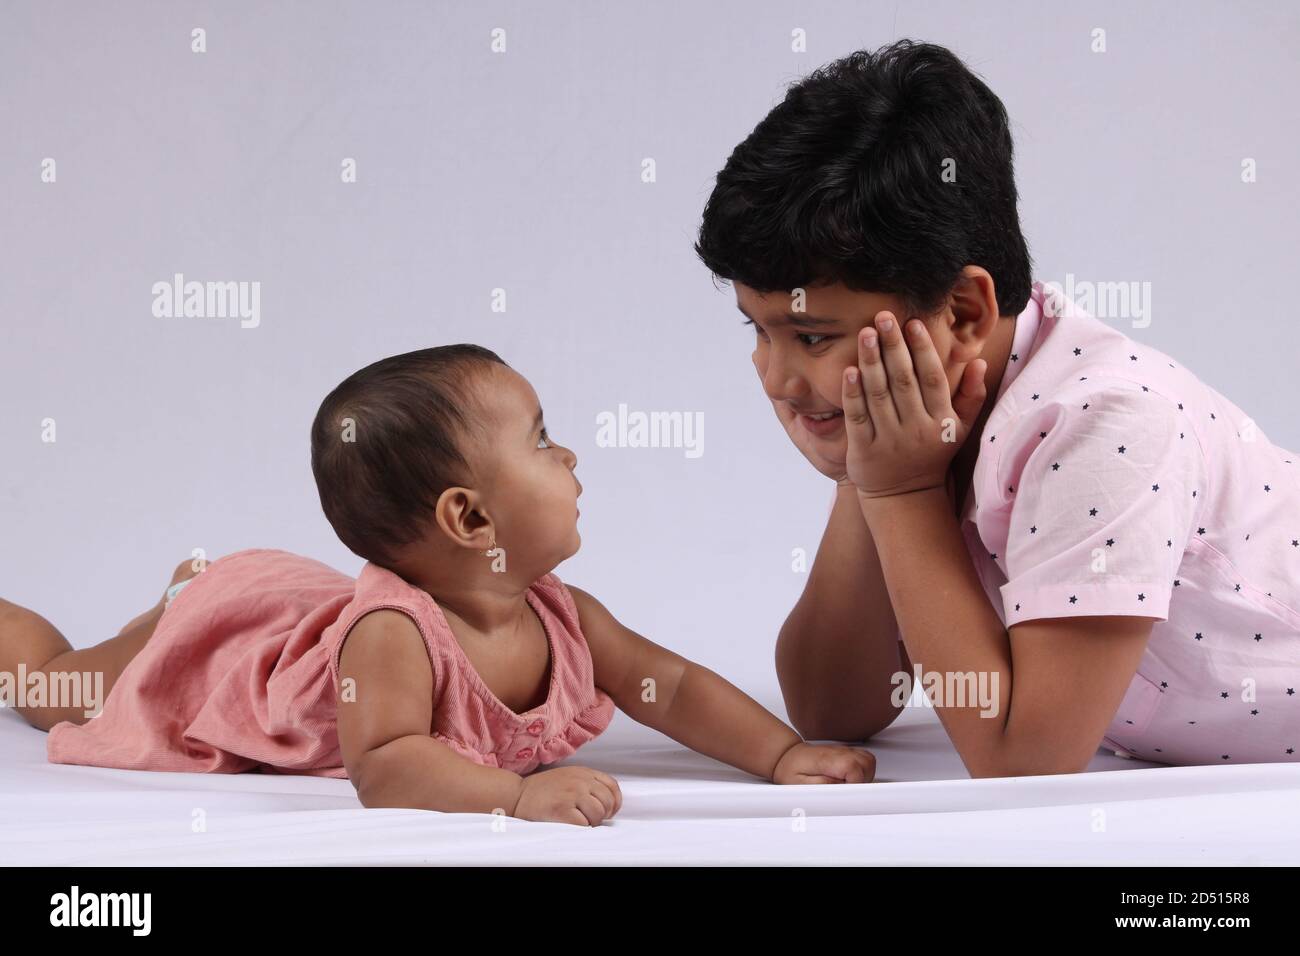 Cute little boy is playing with his younger sister at home lying on white backgroung. Stock Photo